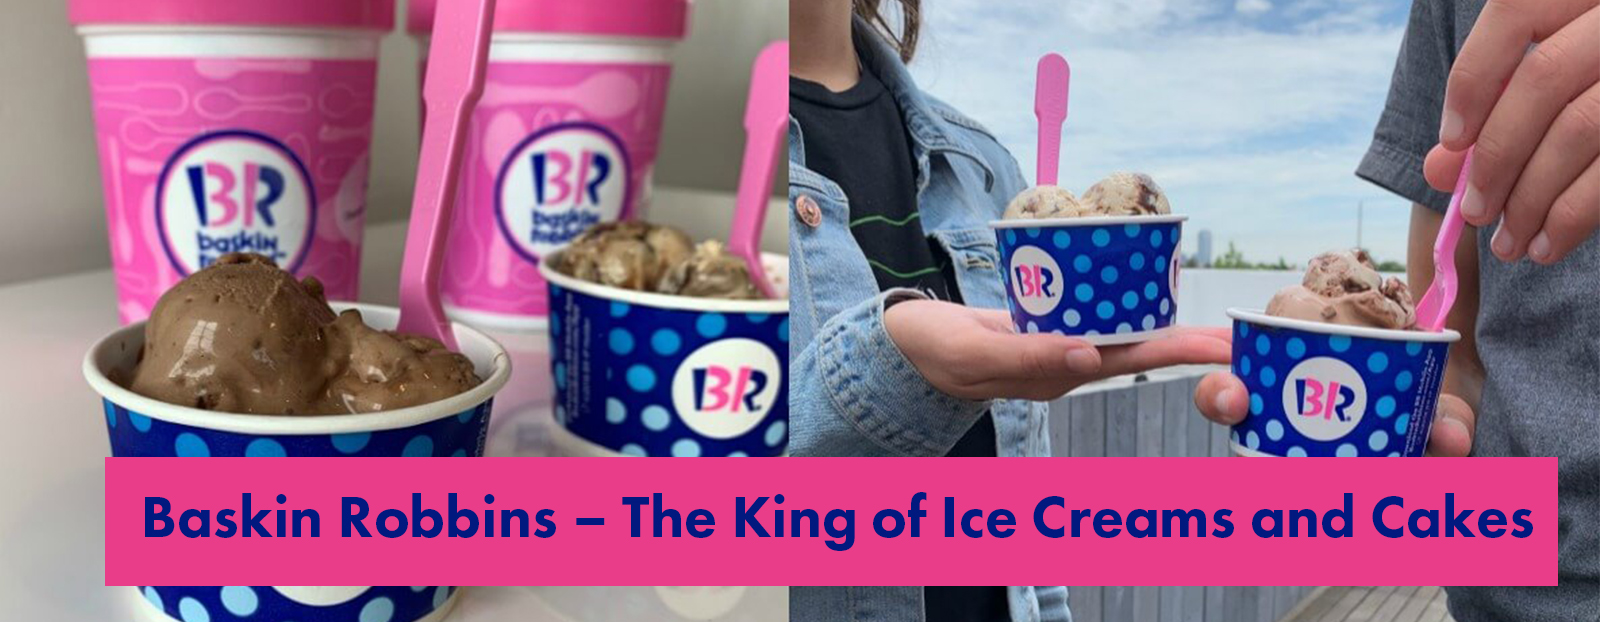 Baskin Robbins – The King of Ice Creams and Cakes